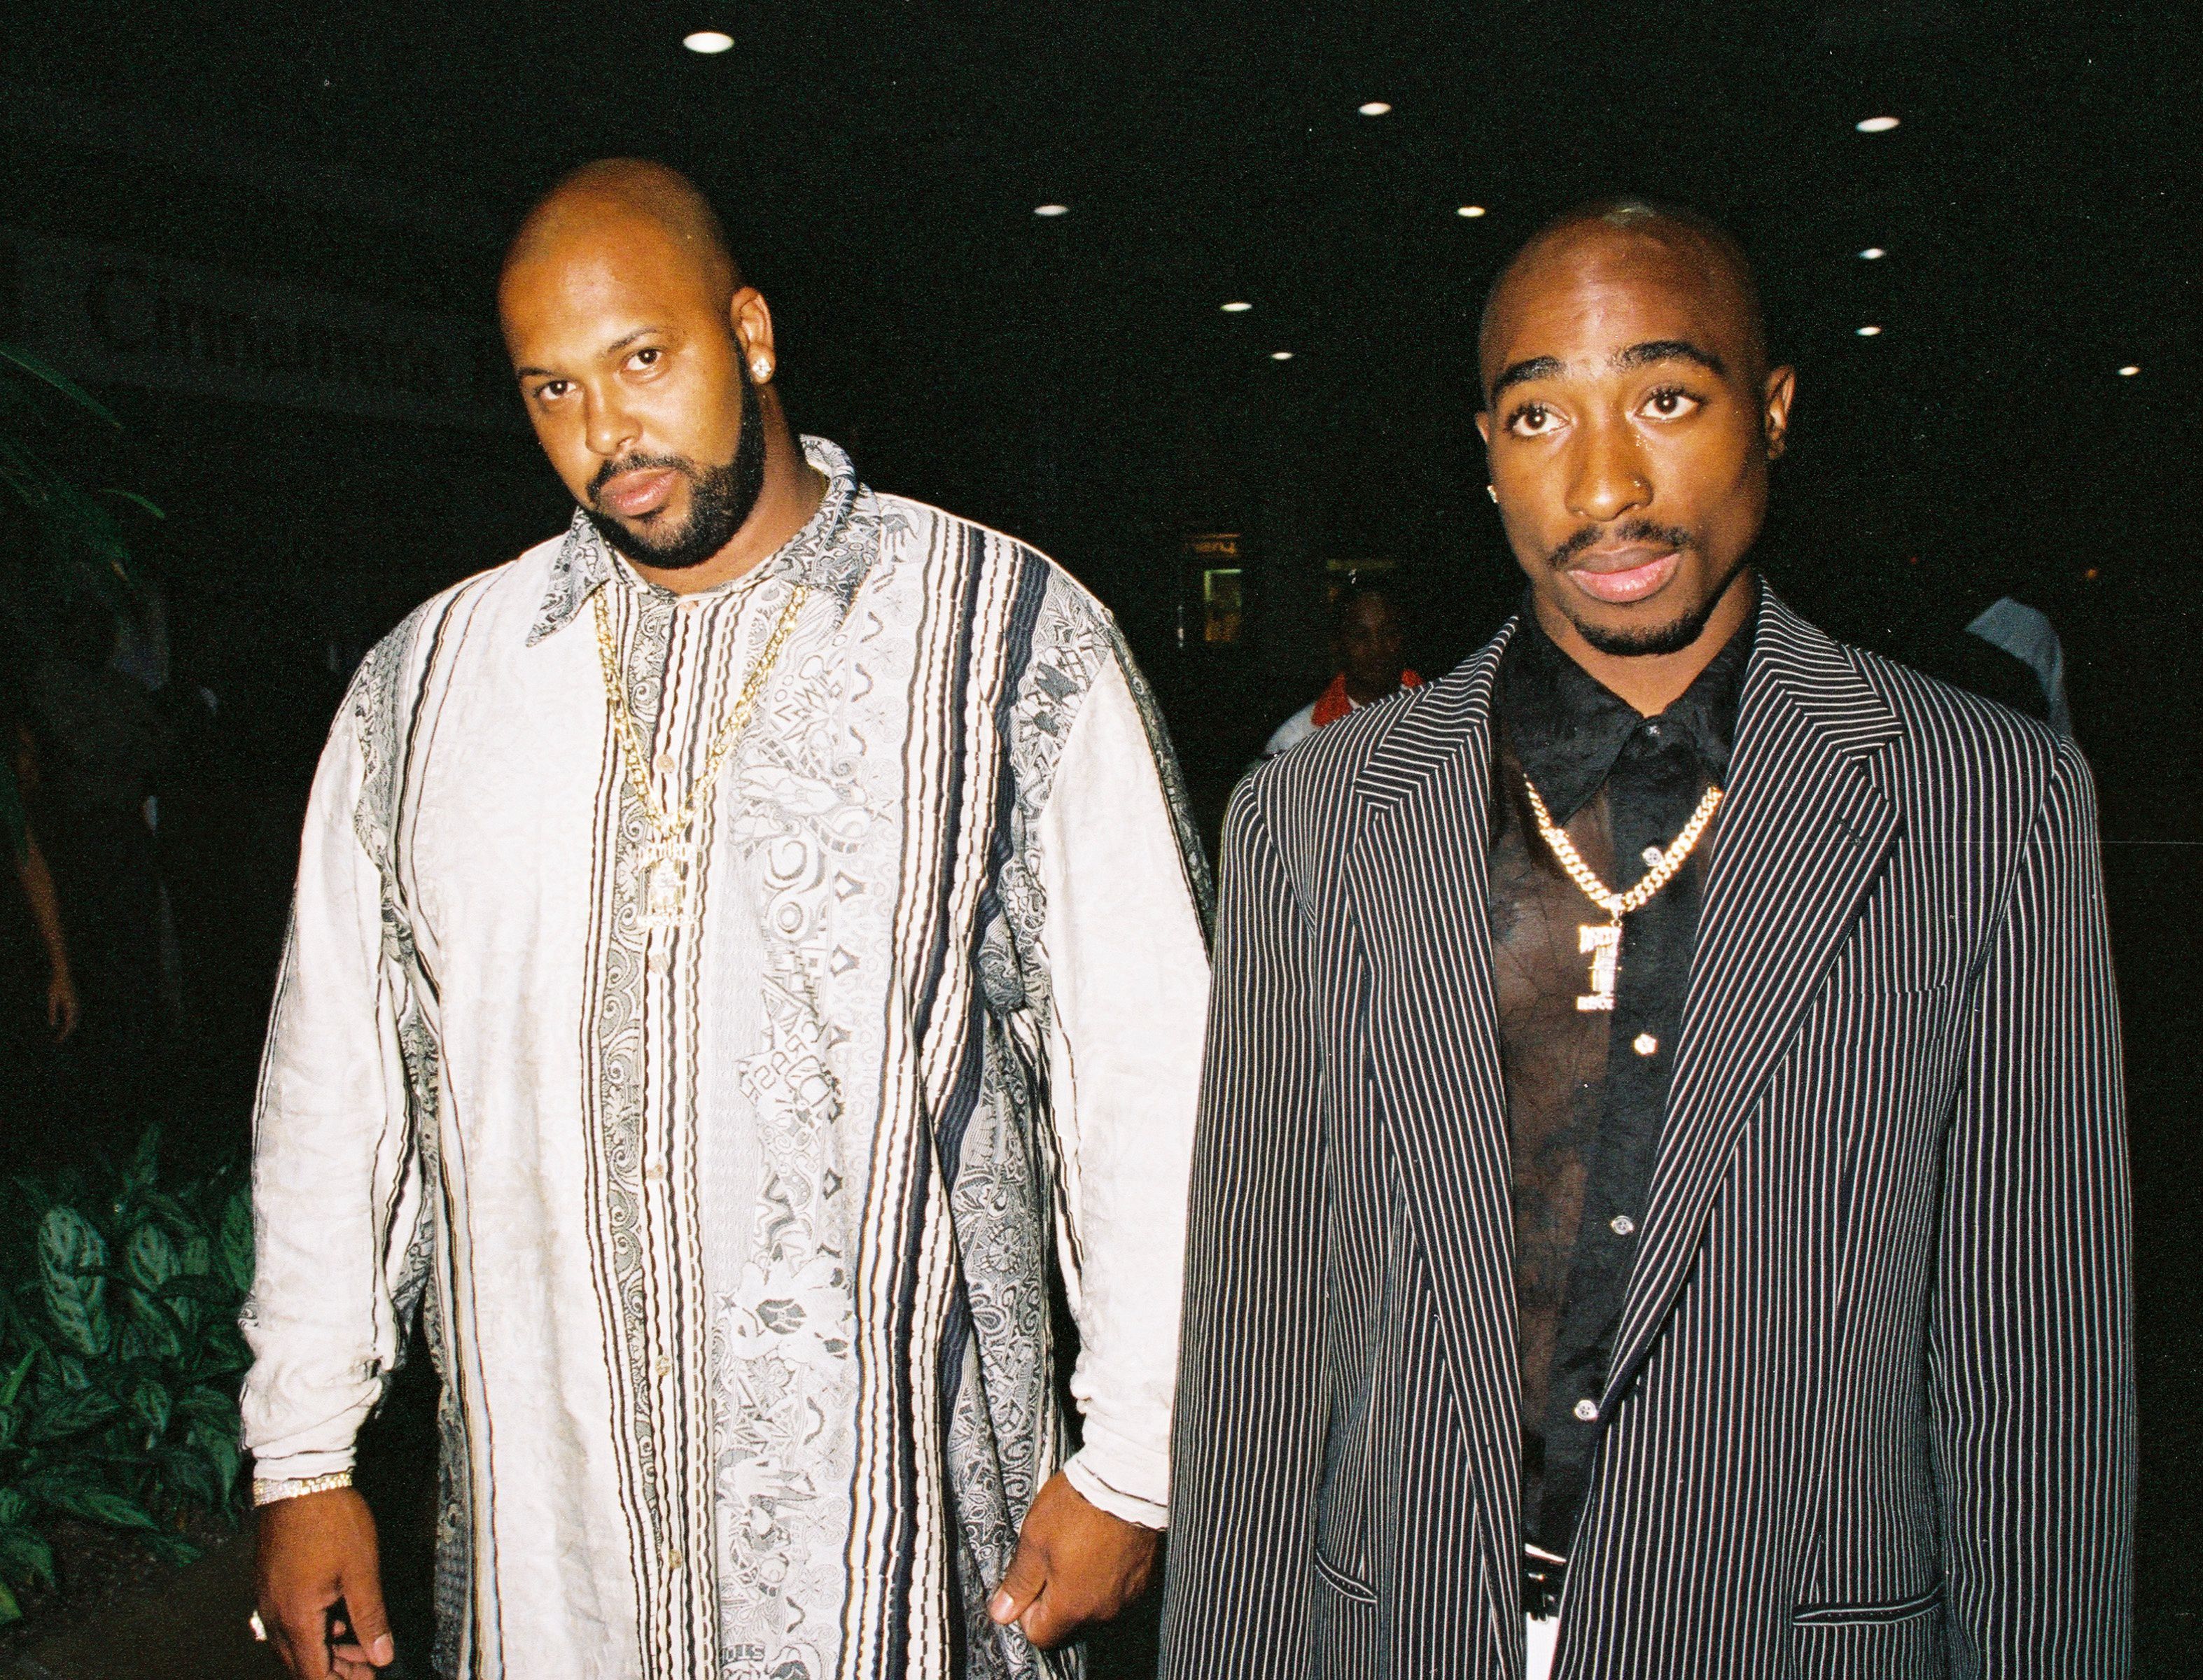 Suge Knight with Tupac in 1996